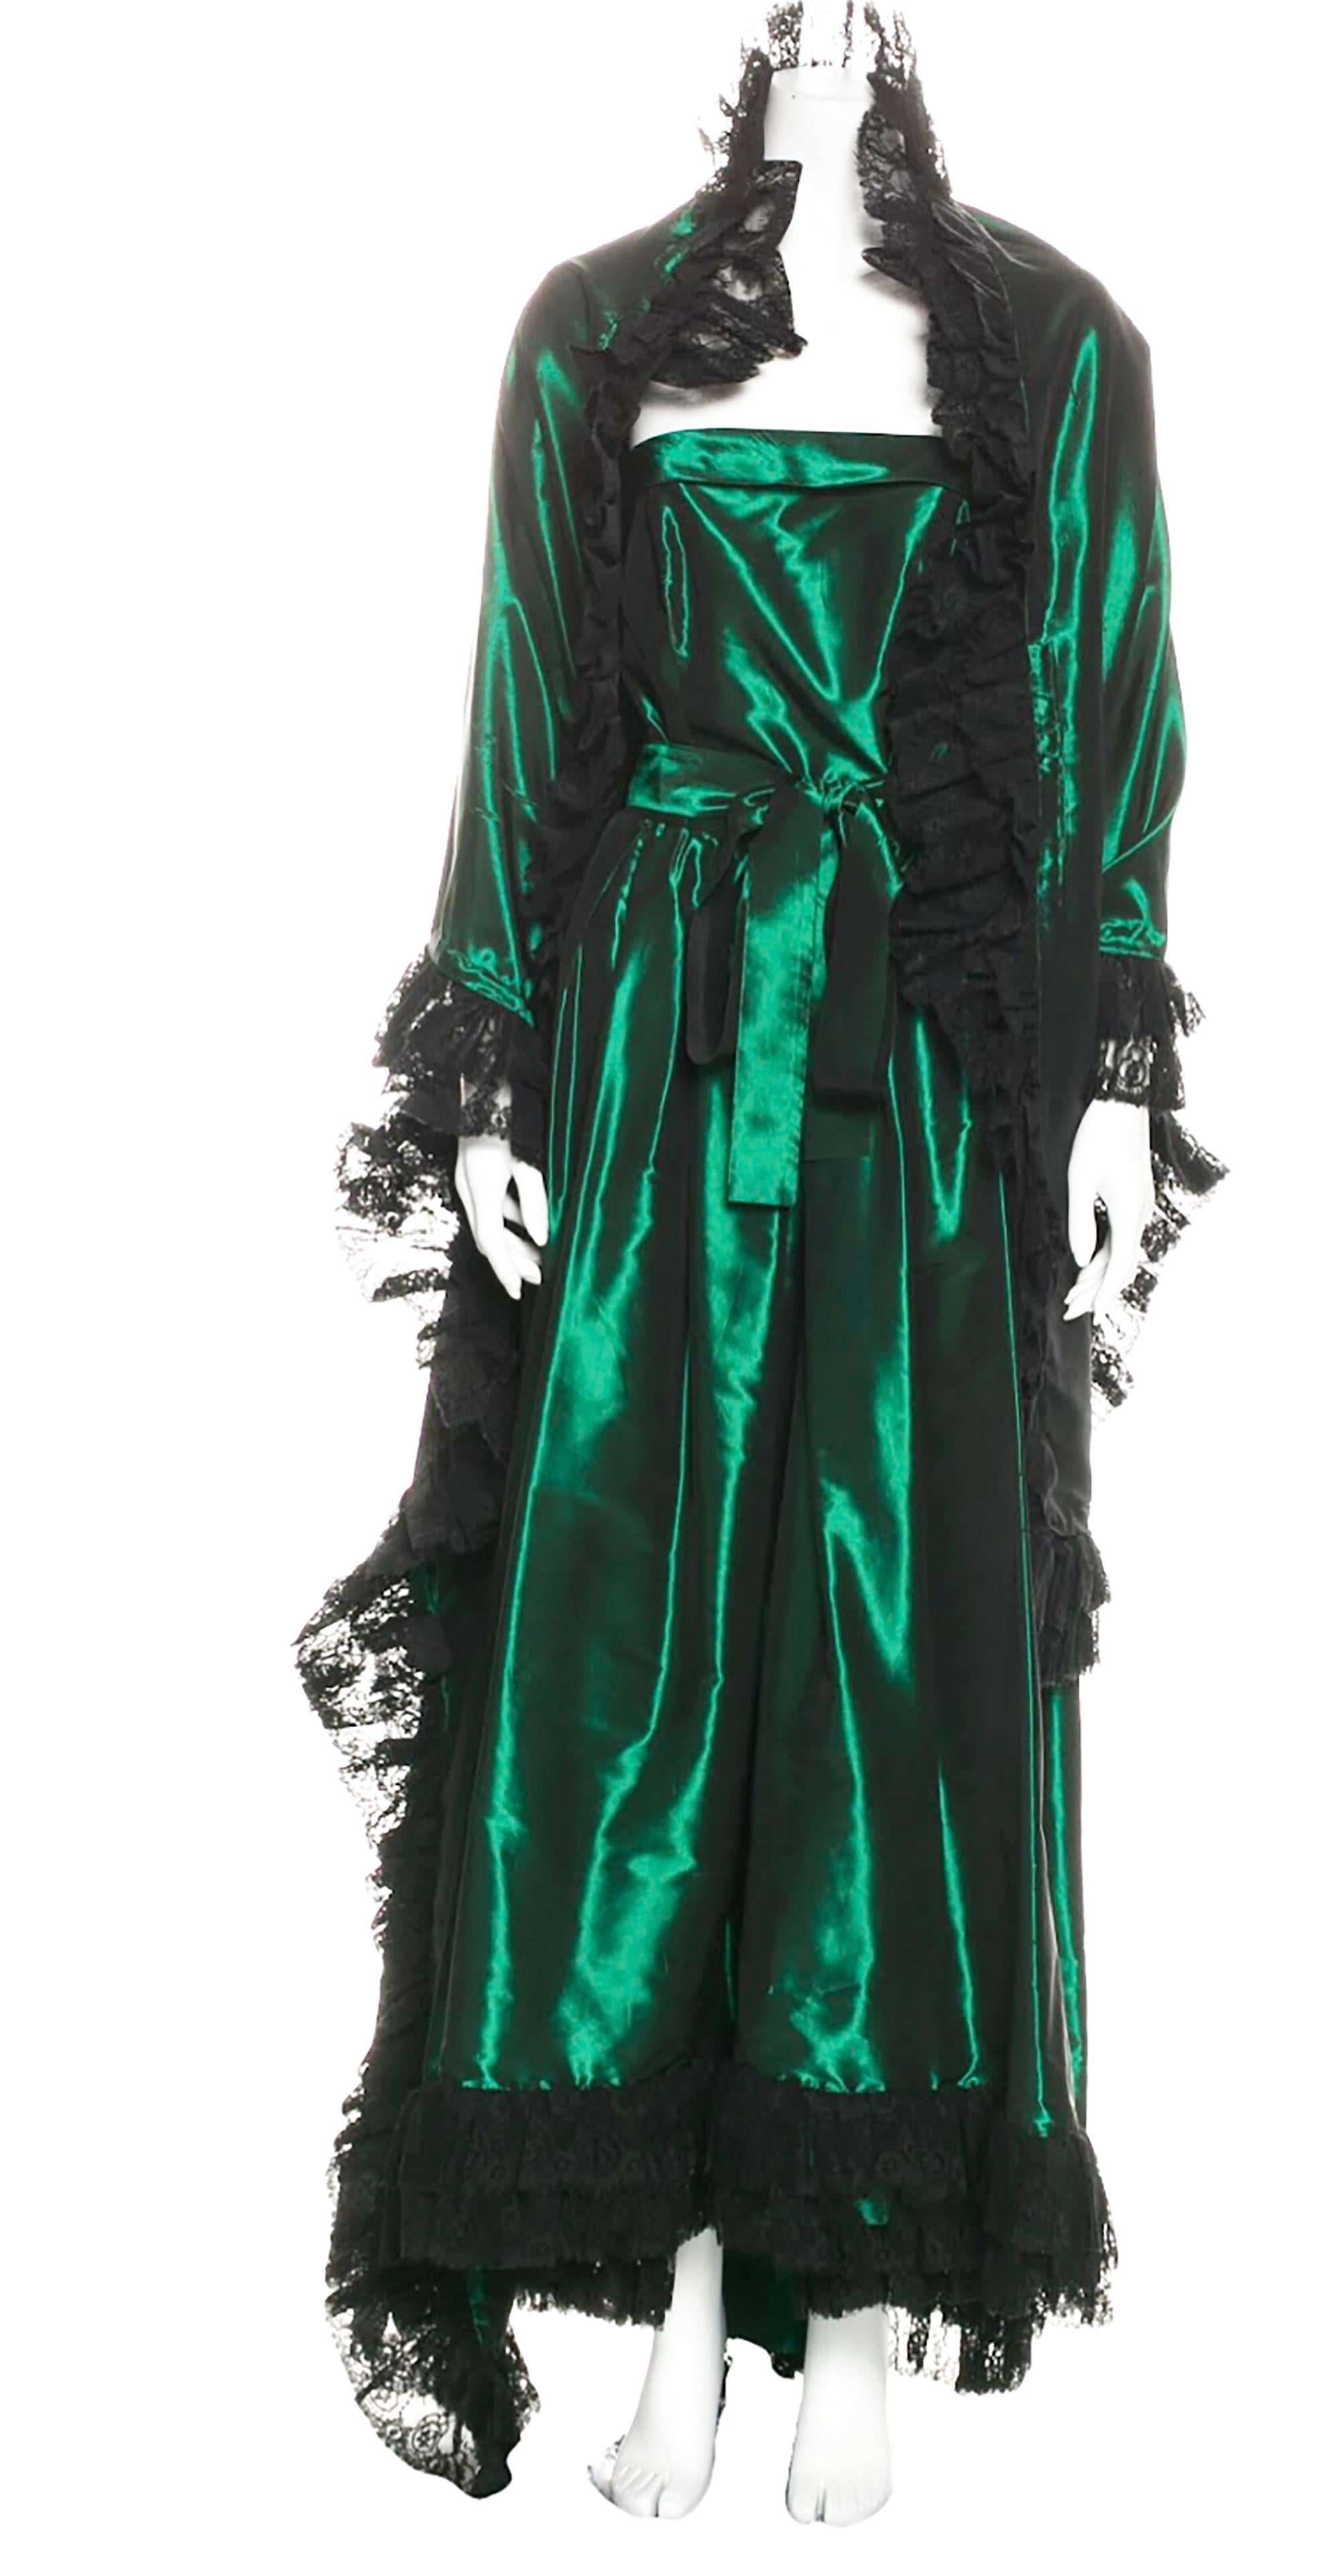 1980S YVES SAINT LAURENT GREEN TAFFETA STRAPLESS GOWN WITH LACE TRIM AND LARGE SHAWL 
Condition: Excellent
SZ S- M // FR40 
bust 30